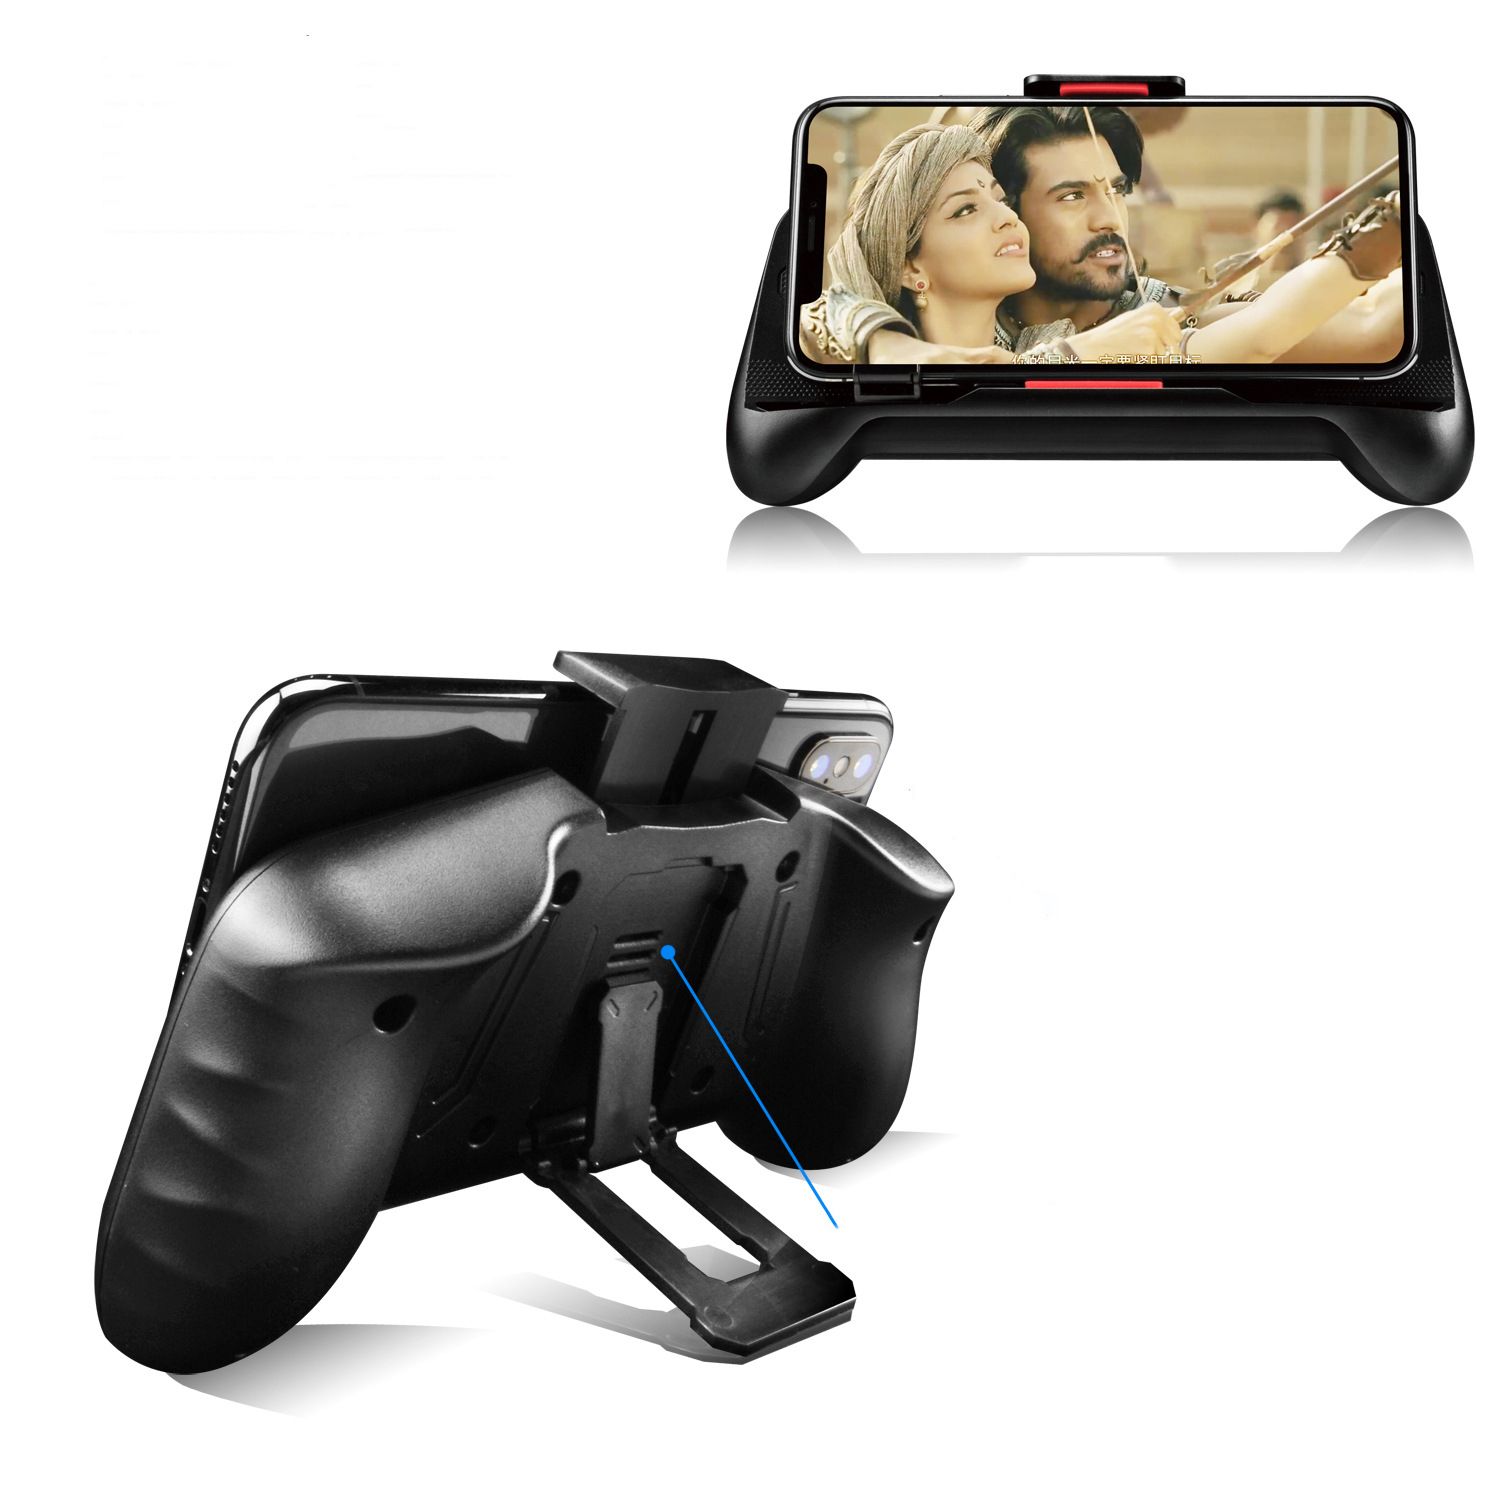 Bakeey-24GHz-Wireless-Game-Controller-Gamepad-Joystick-For-Android-TV-Box-PC-1590881